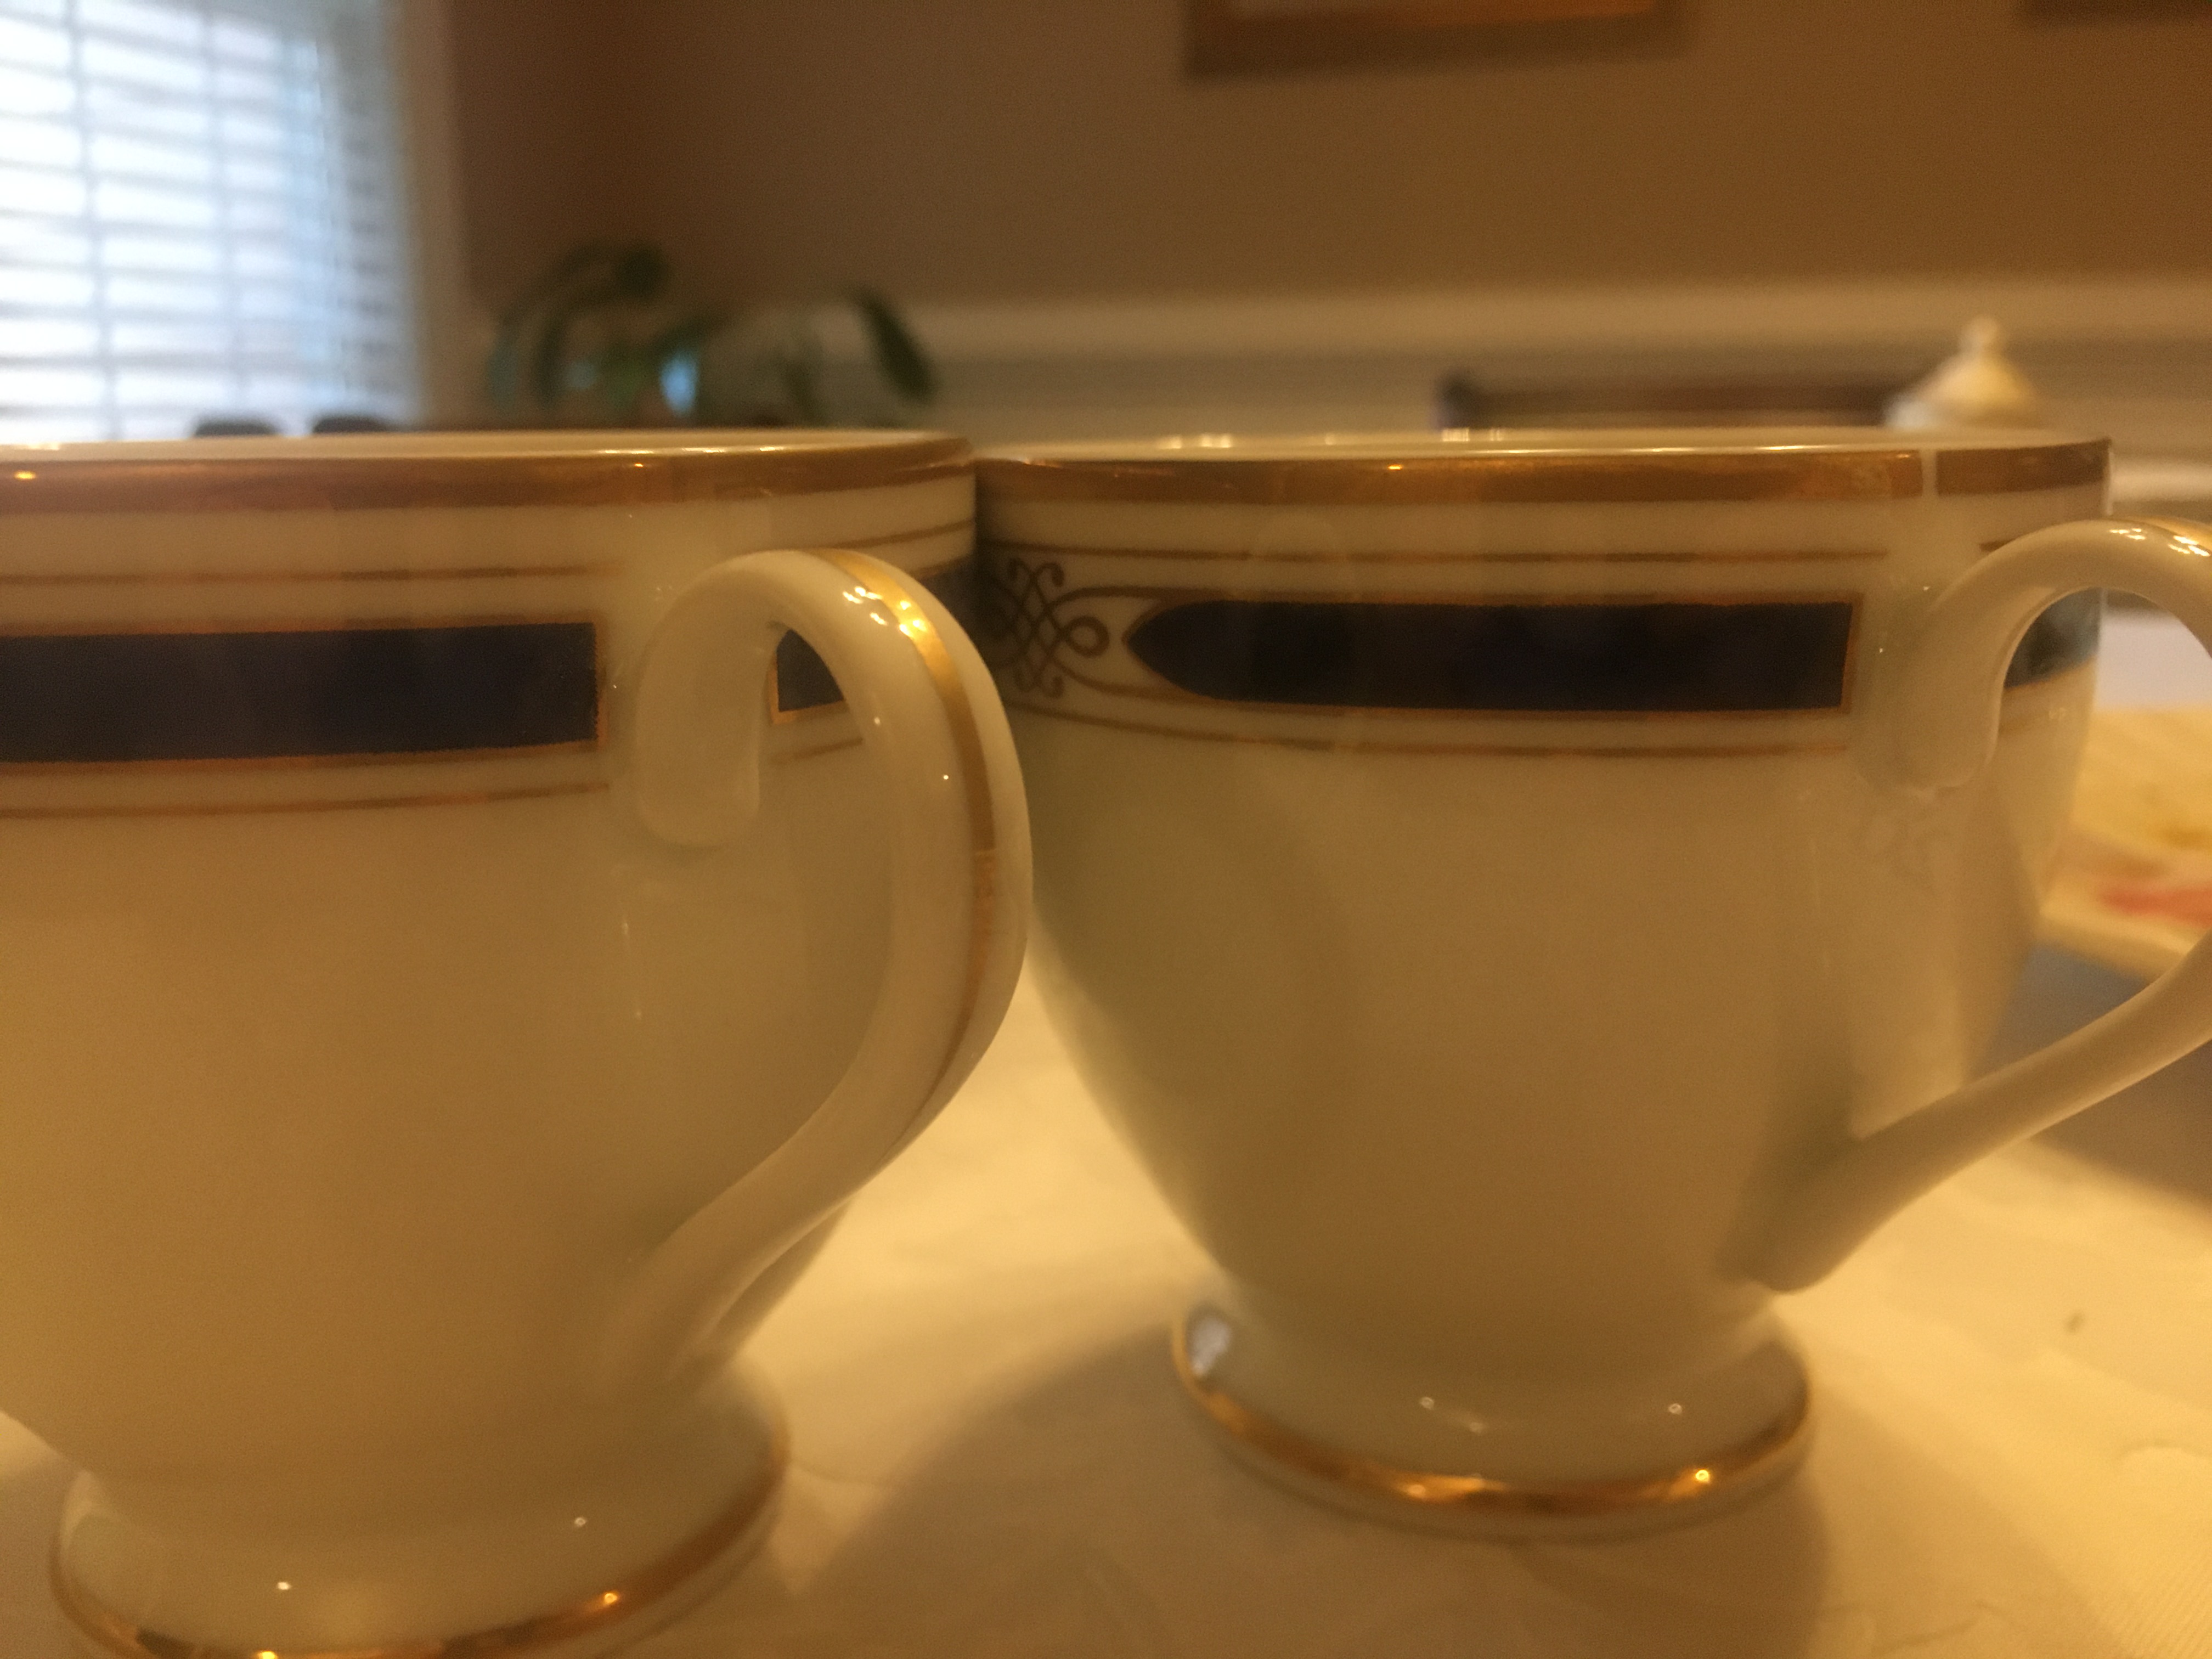 Two teacups